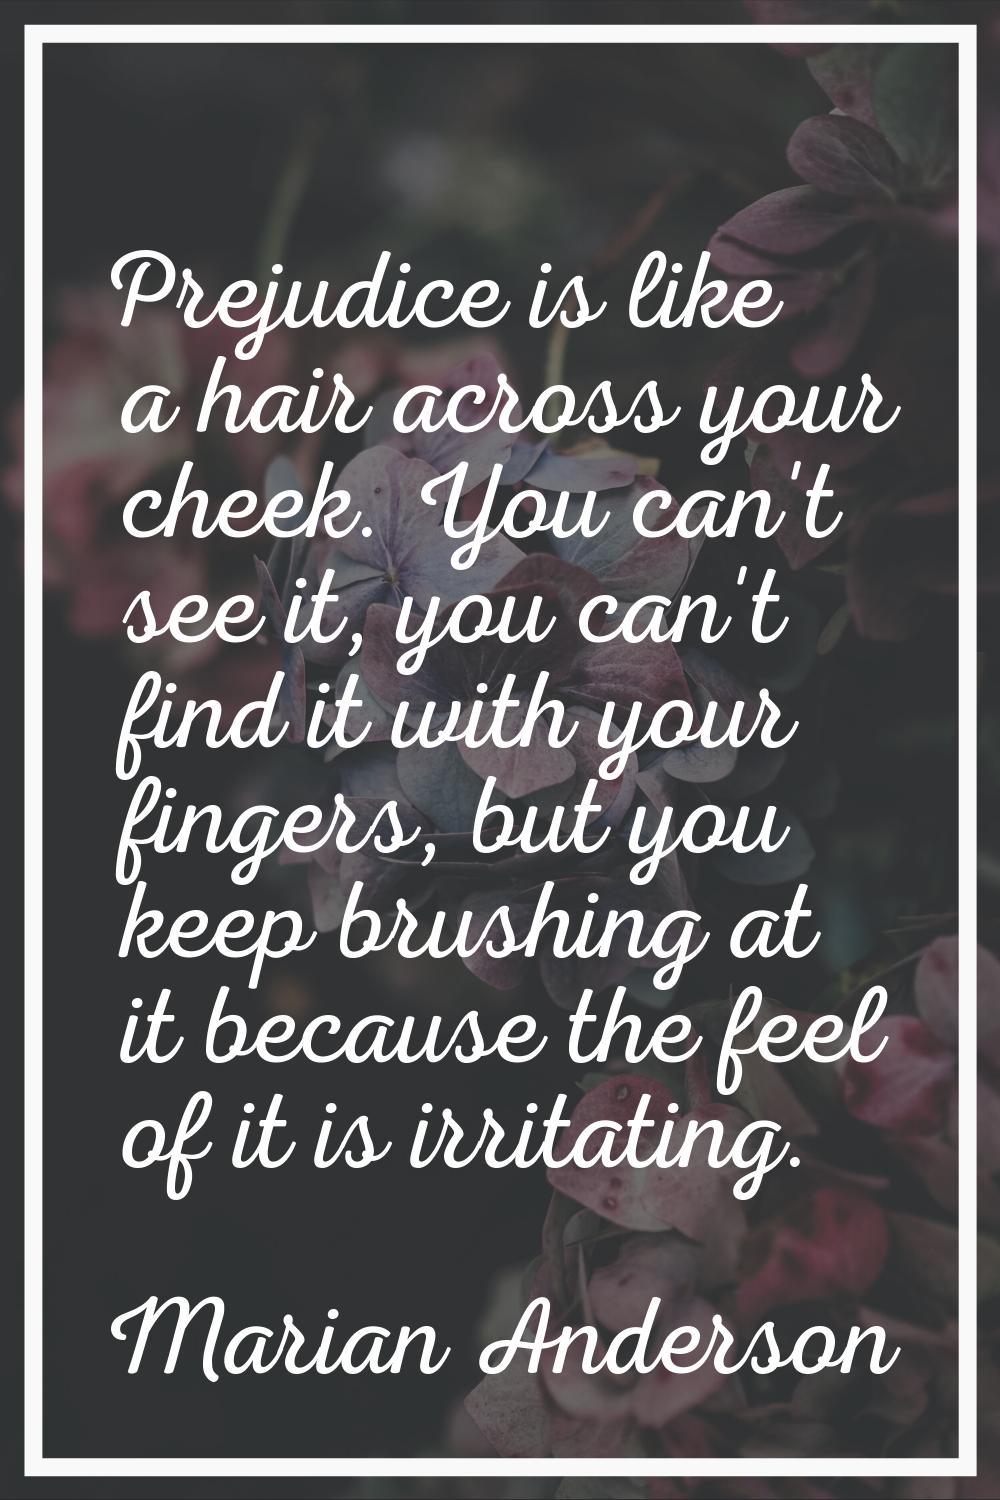 Prejudice is like a hair across your cheek. You can't see it, you can't find it with your fingers, 